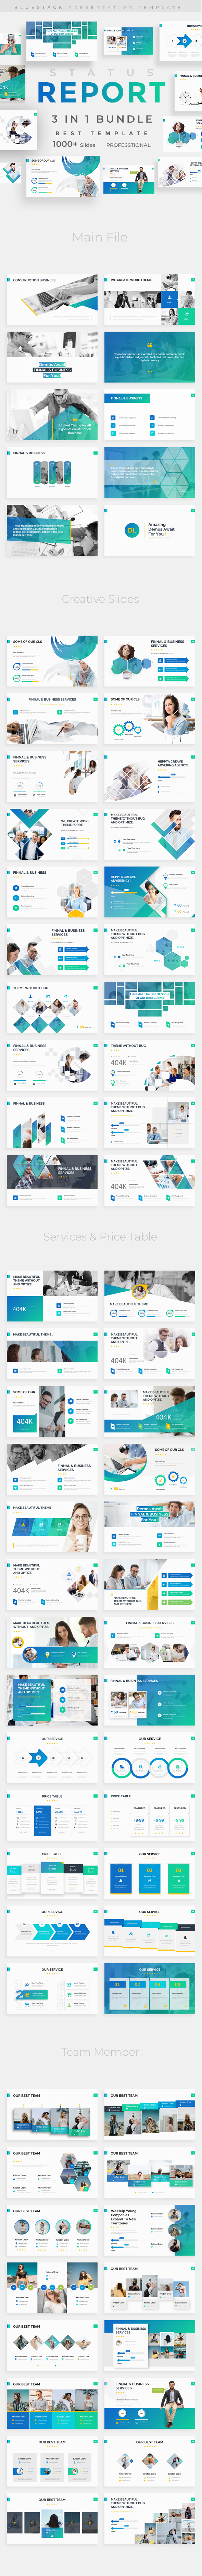 Status Report 3 in 1 Pitch Deck Bundle Powerpoint Template